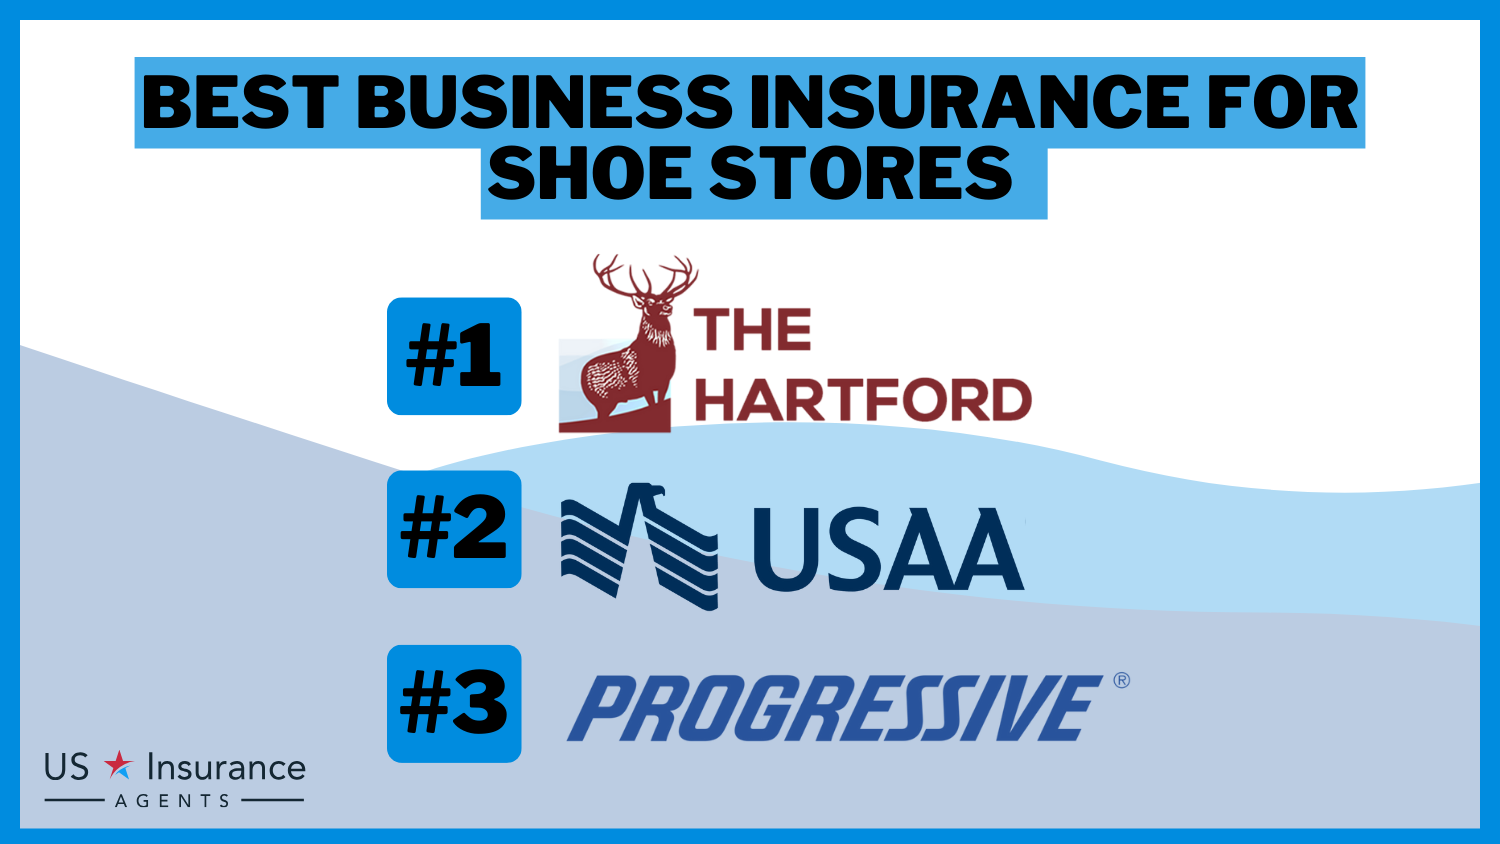 3 Best Business Insurance for Shoe Stores: The Hartford, USAA and Progressive.